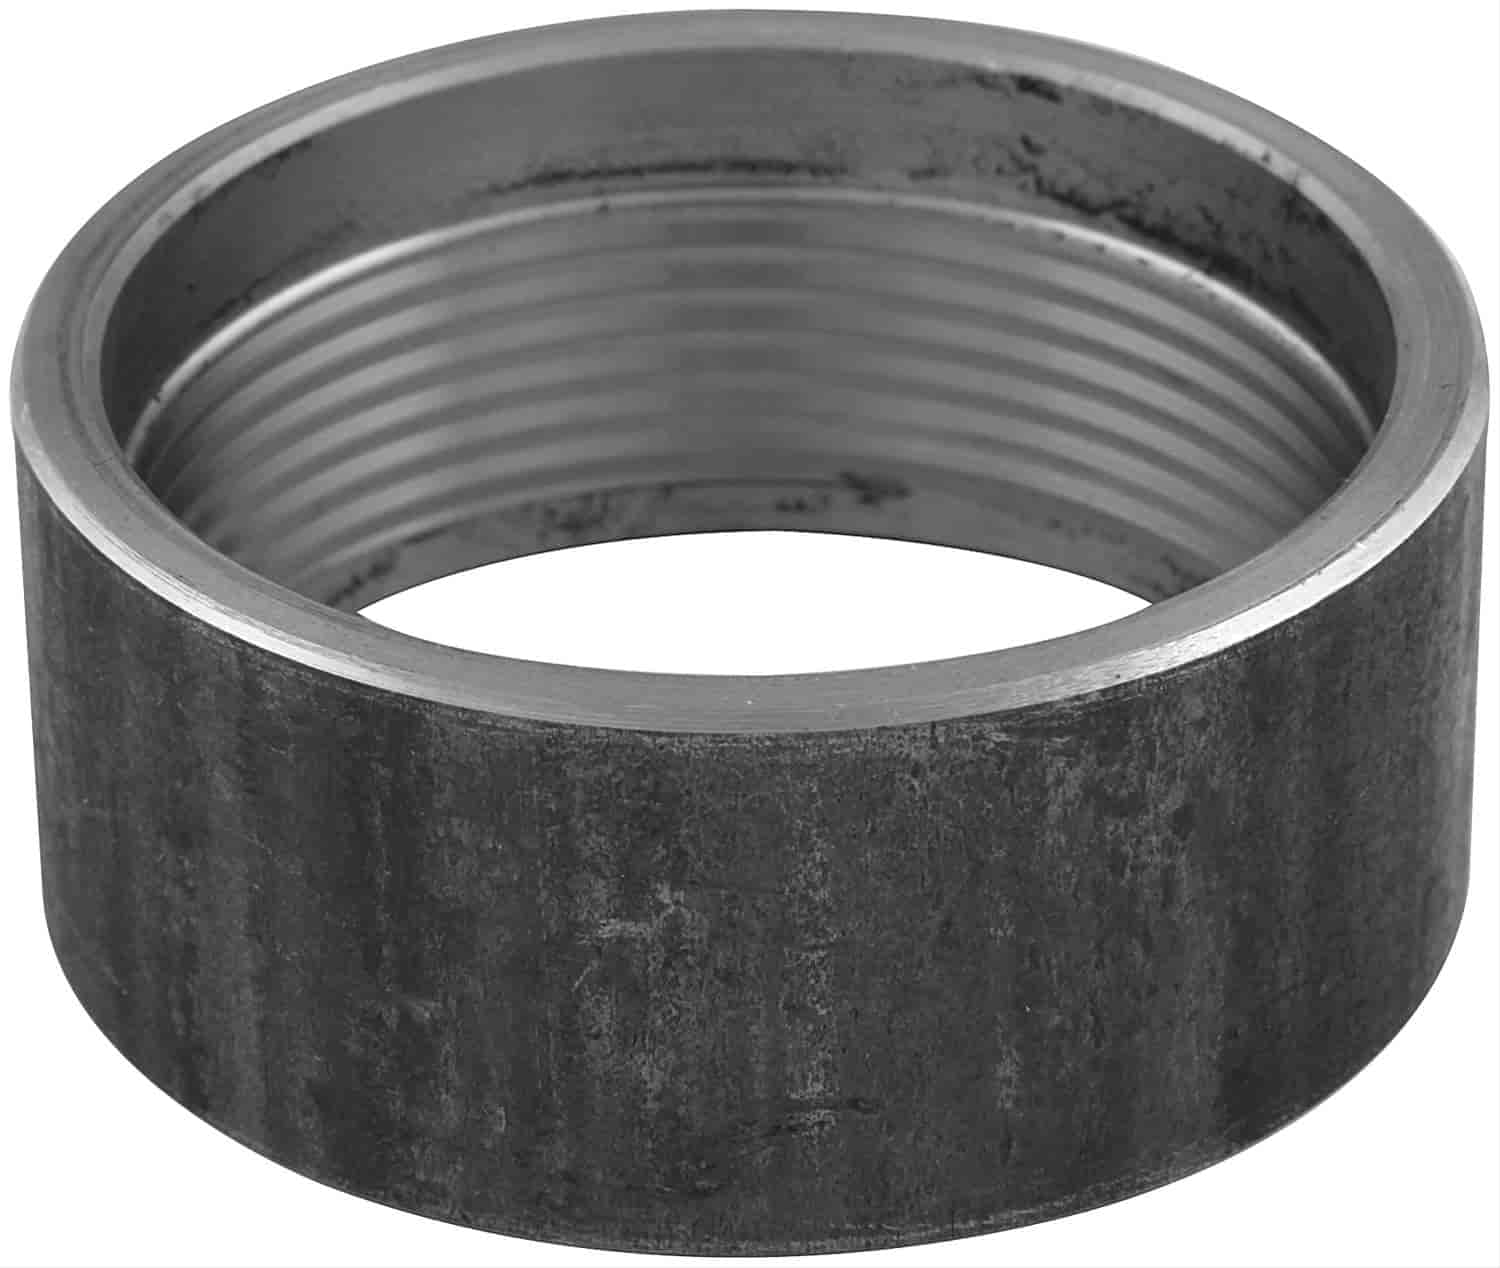 Ball Joint Sleeve Screw-In Type